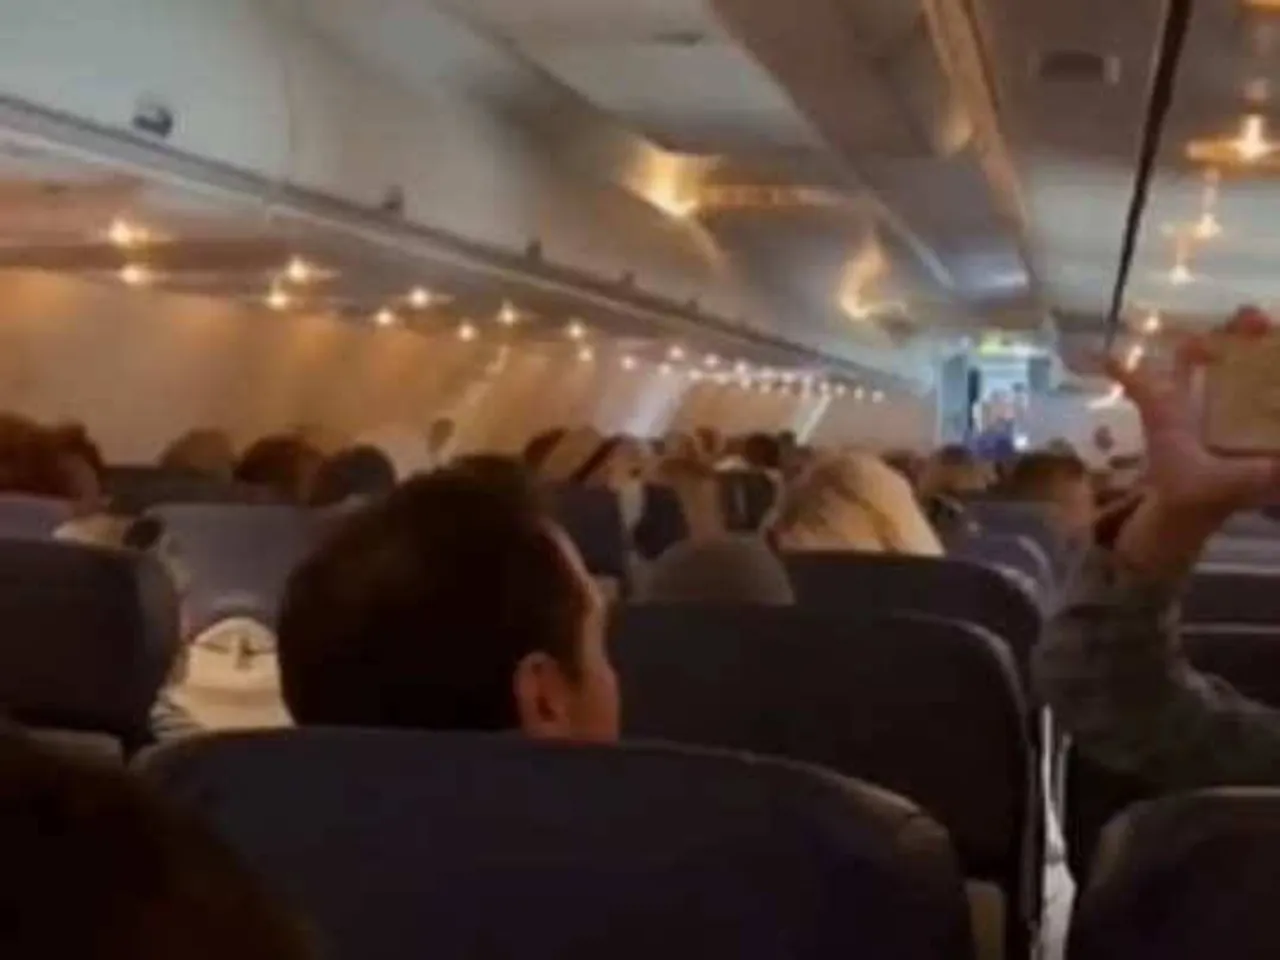 An adorable video is going viral on social media showing a plane full of passengers singing Happy Birthday to a man on his 95th birthday.